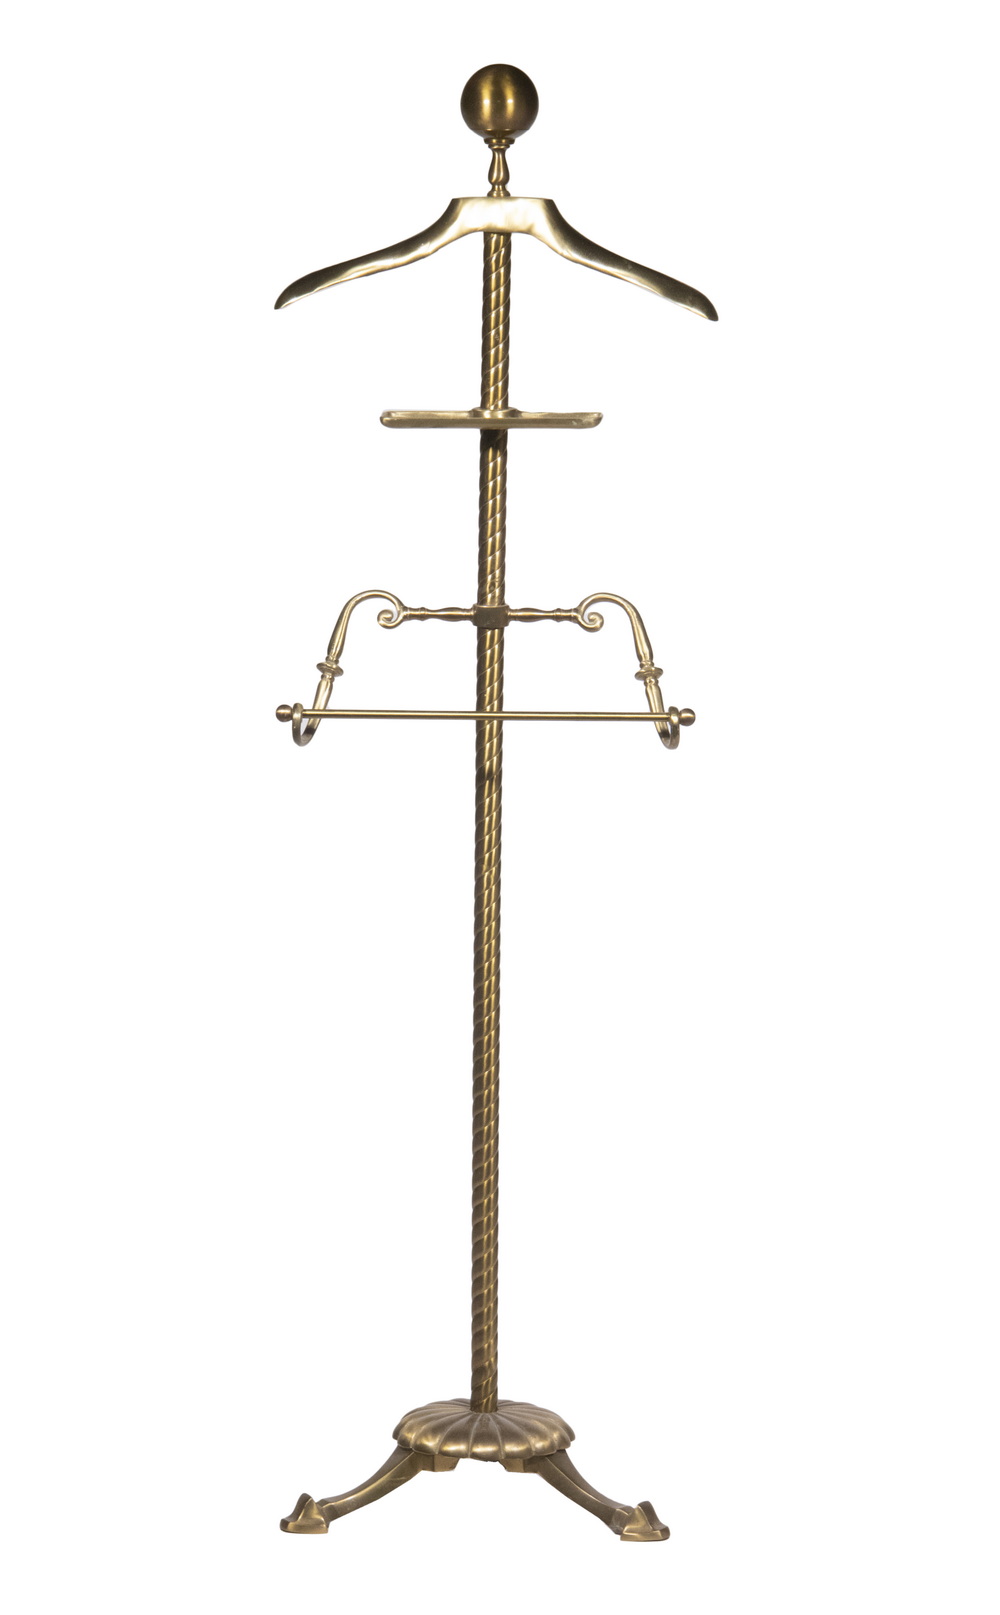 HEAVY CAST BRASS VALET STAND 20TH 2b273f